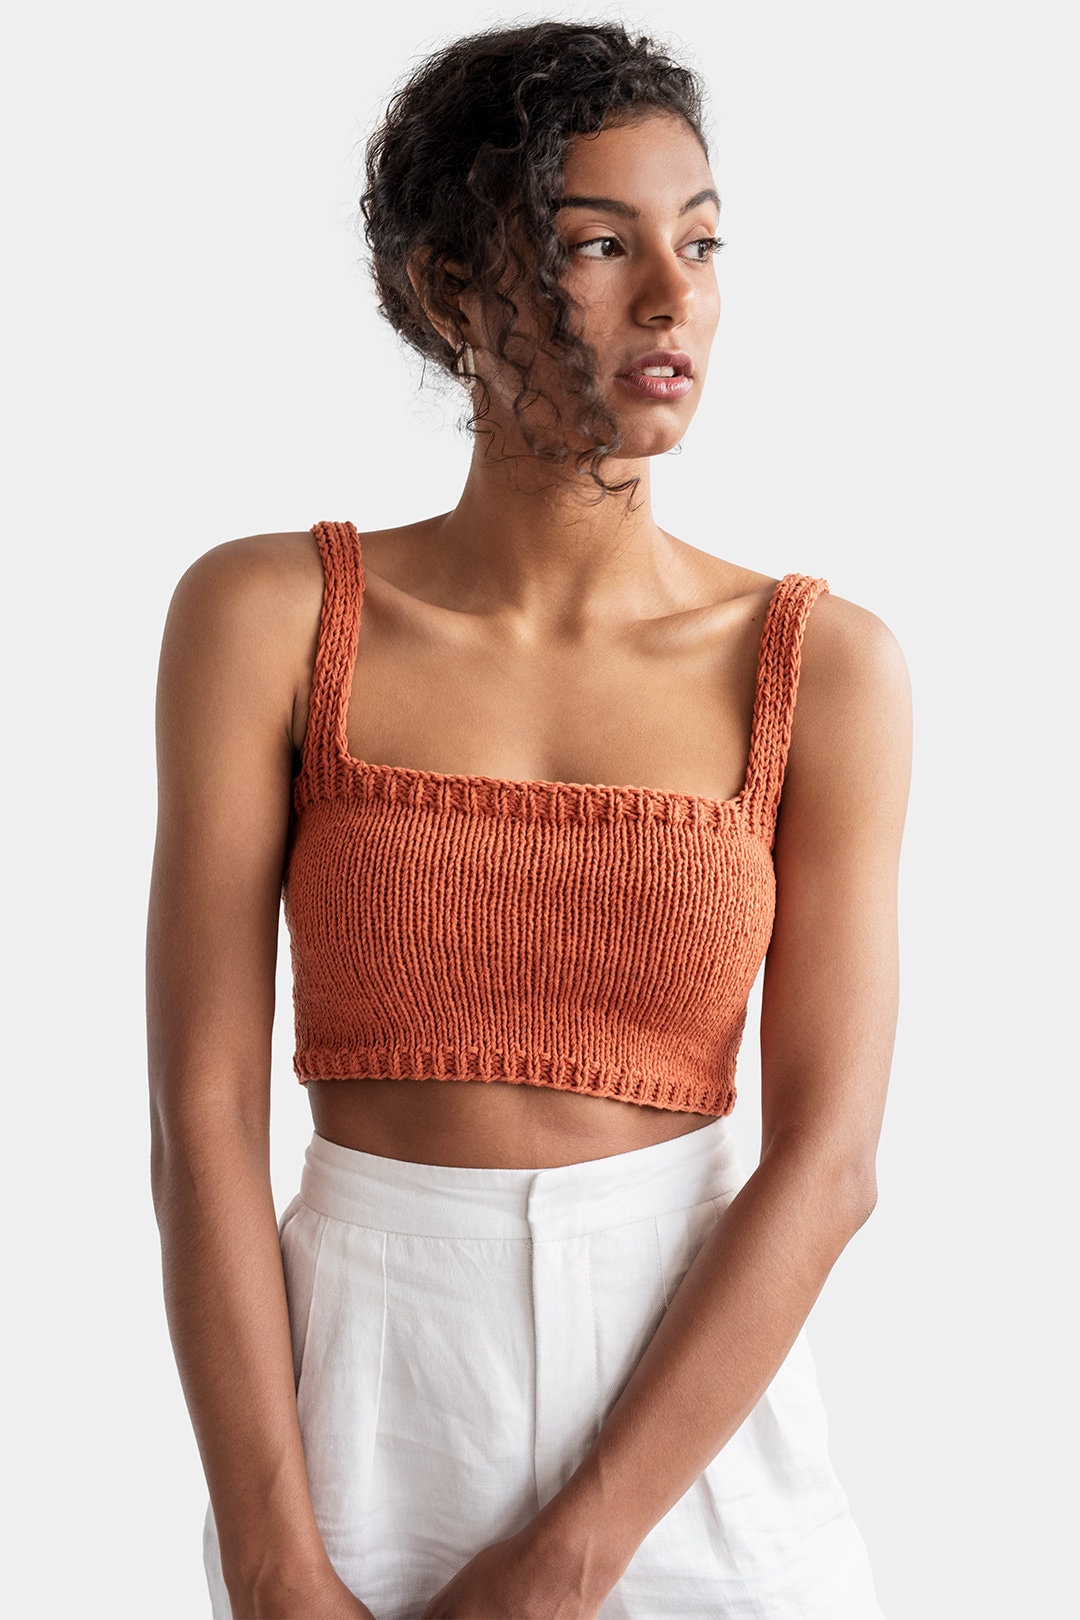 Square Neck Crop Top, Minimal Knit Top, Cropped Yoga Top, Hand Knit, Square  Neckline,sports Knit Bra, Fitted Cotton Bralette in Terra Cotta 